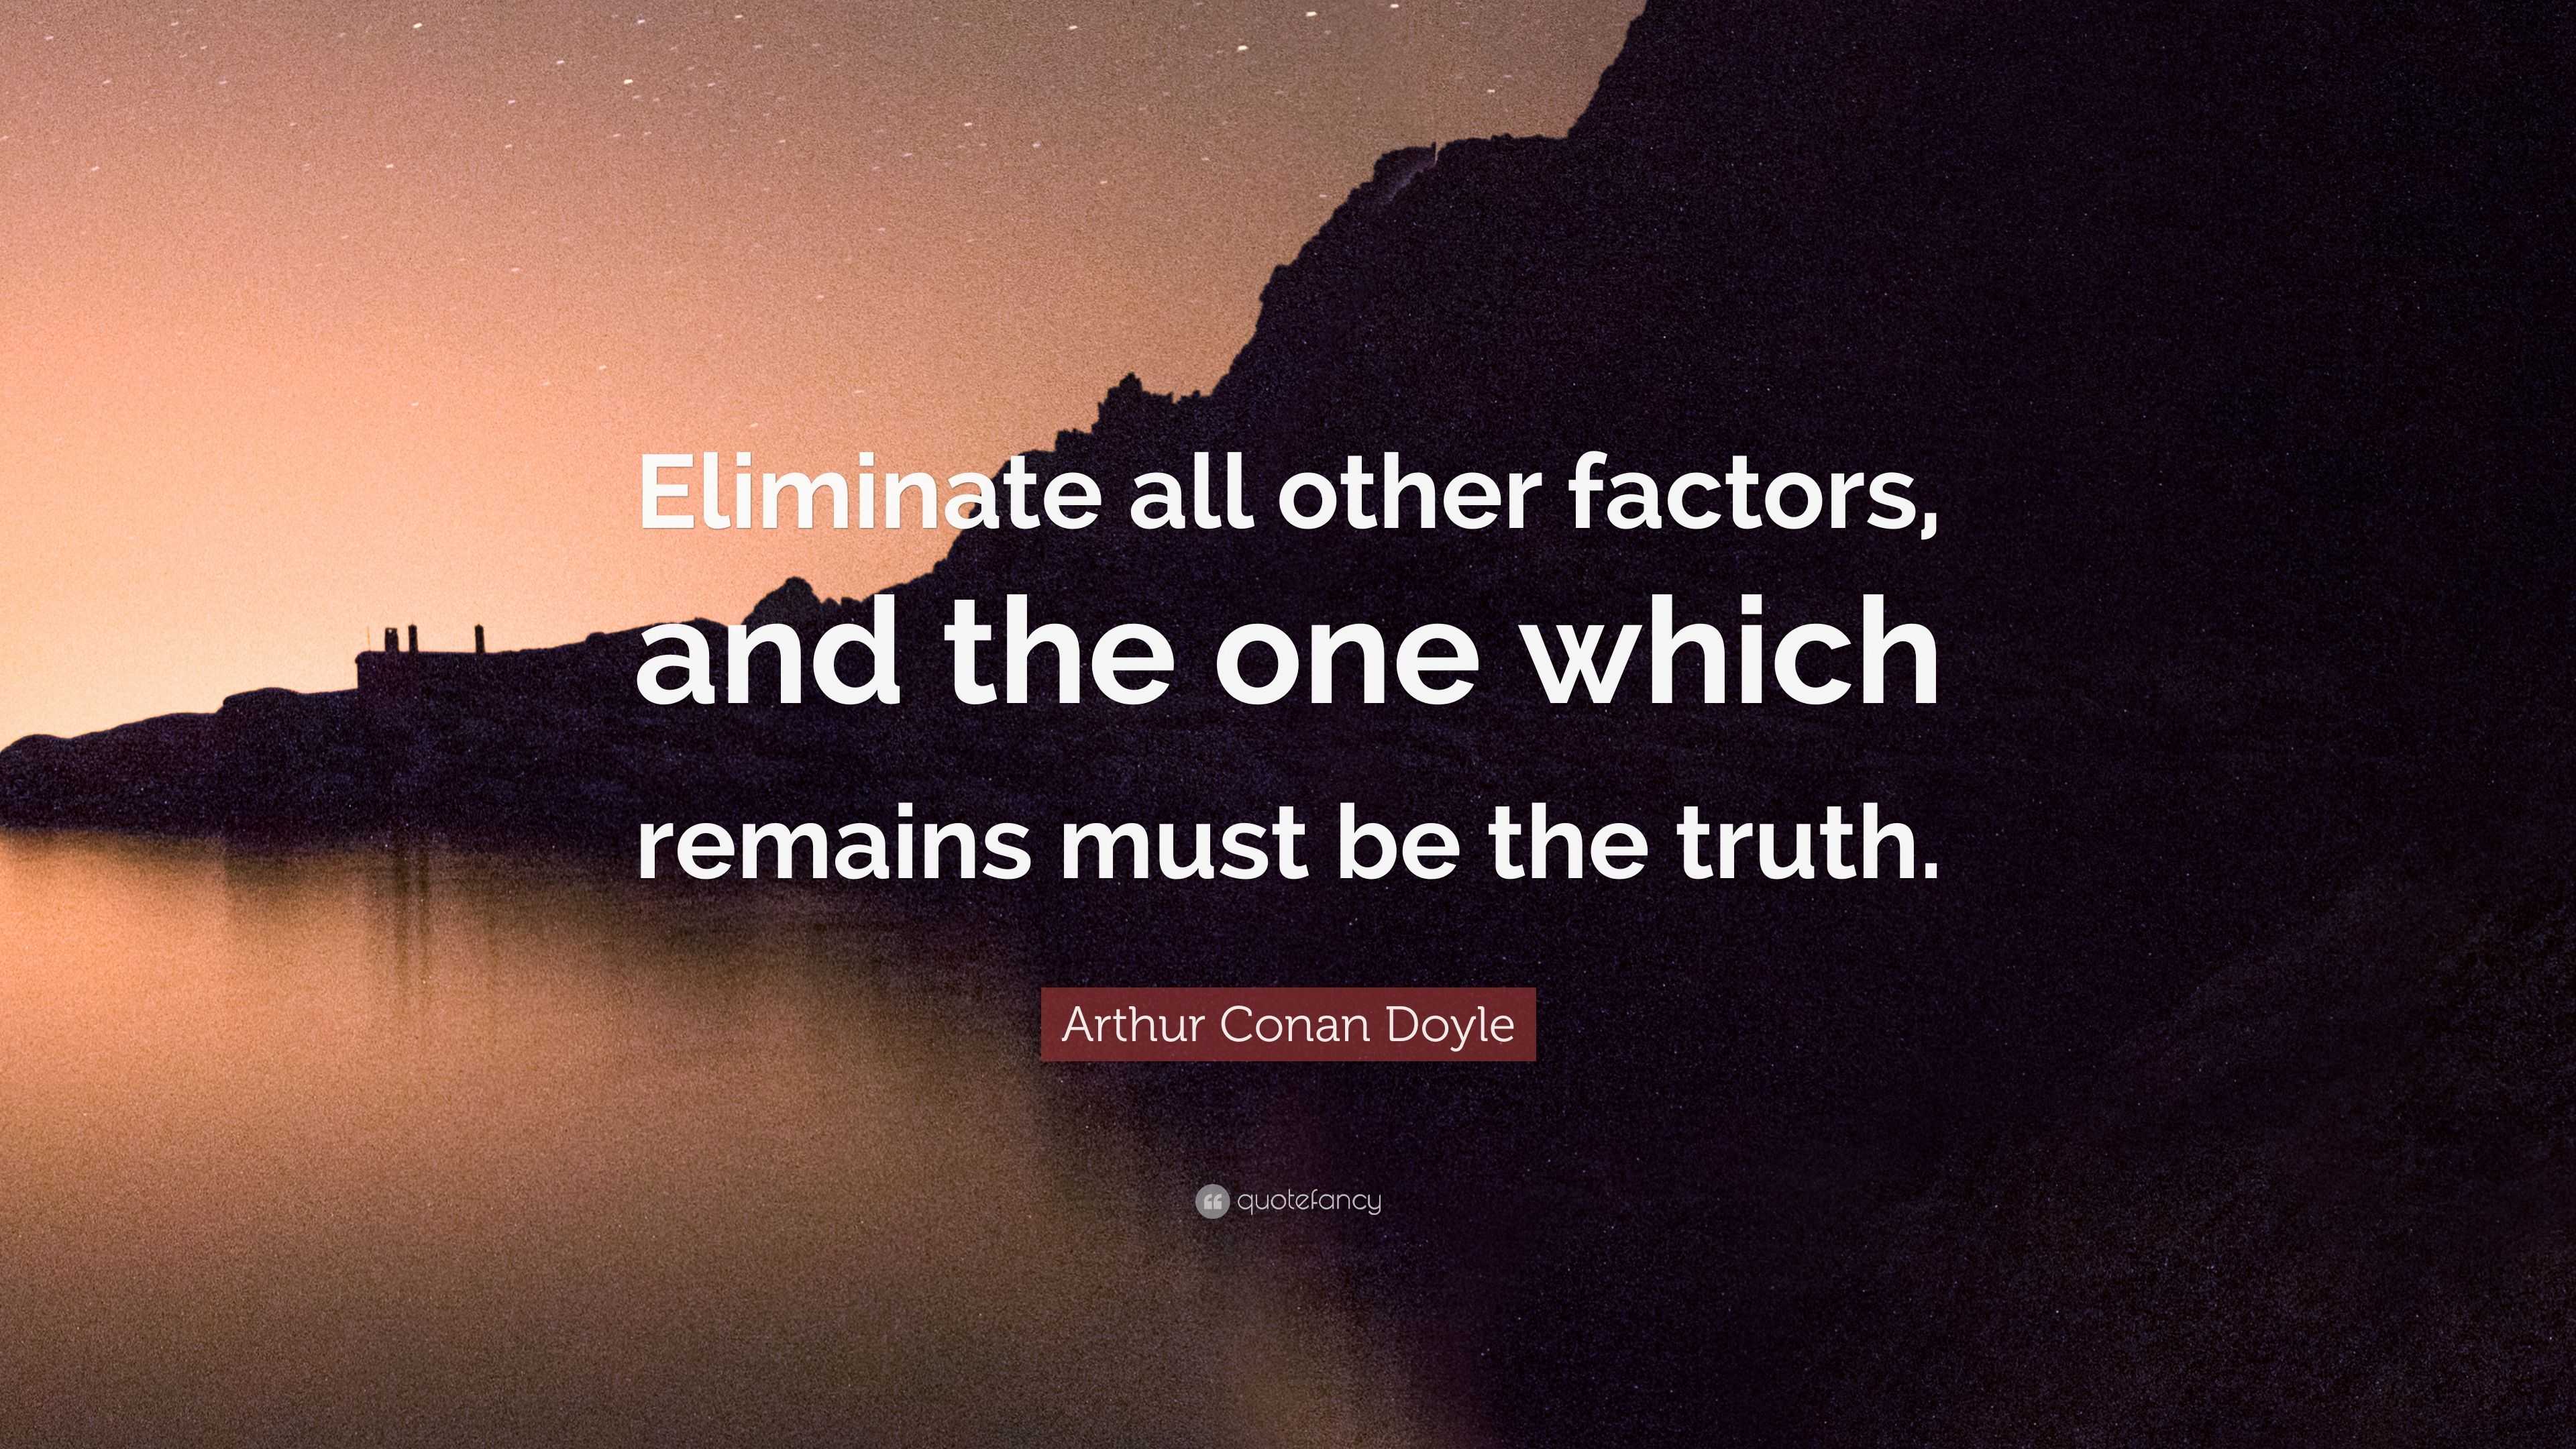 Arthur Conan Doyle Quote Eliminate All Other Factors And The One Which Remains Must Be The